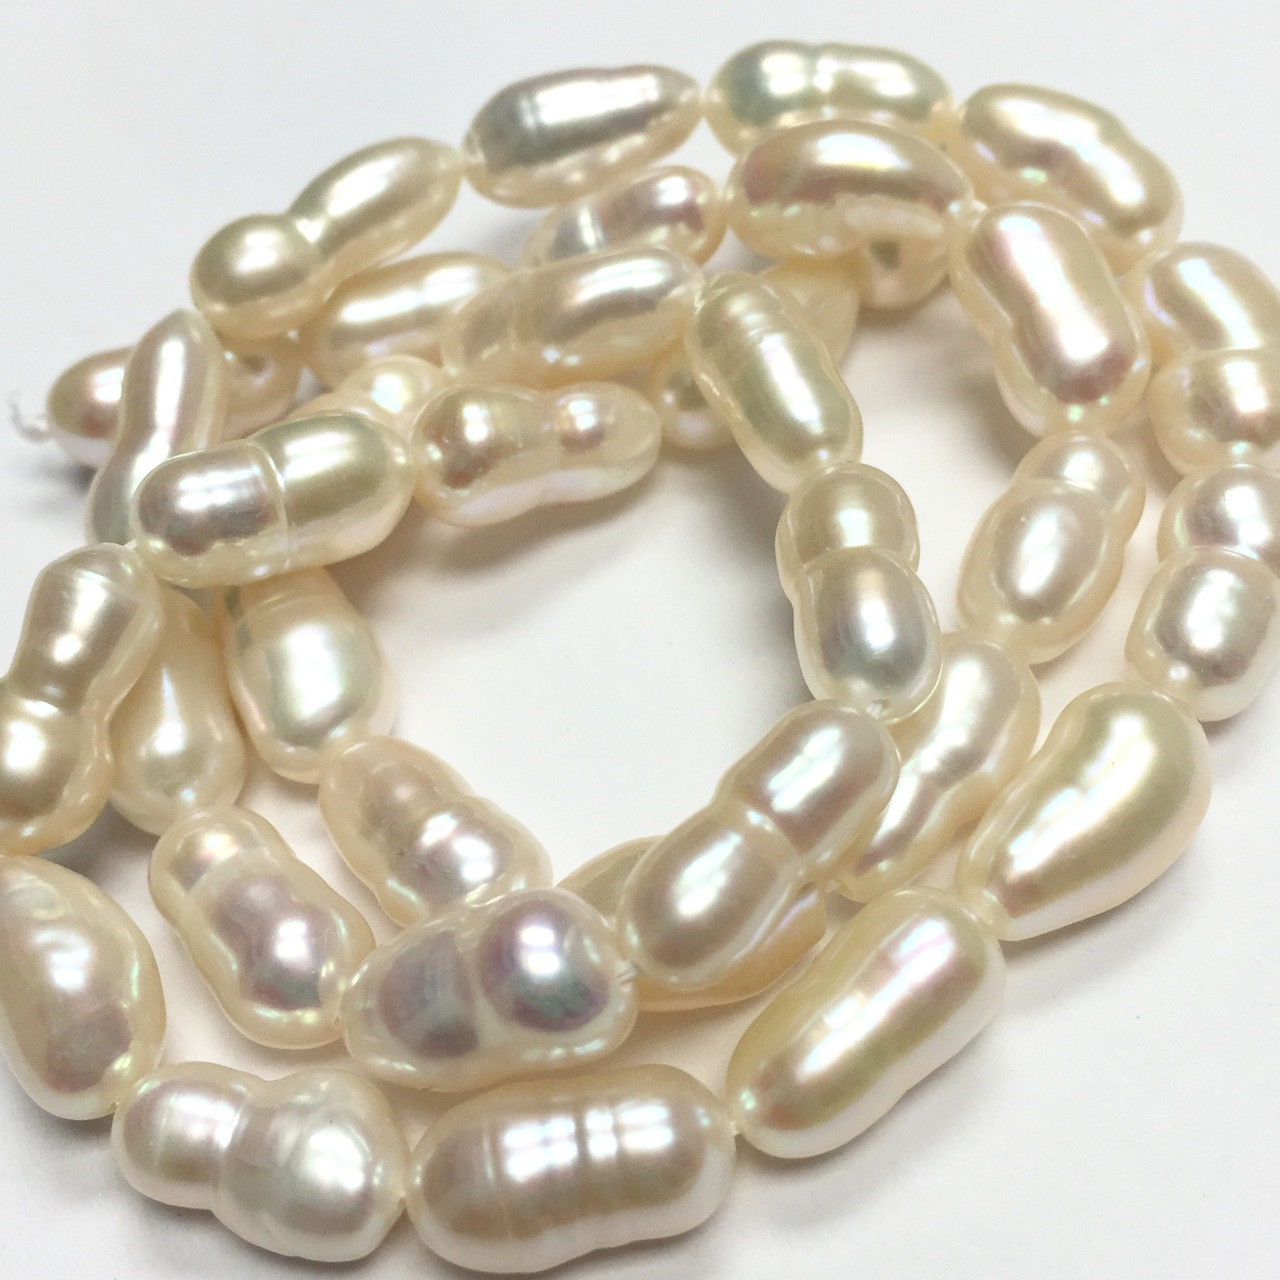 Natural Freshwater Pearl White Heart-Shaped Baroque Pearl Beads